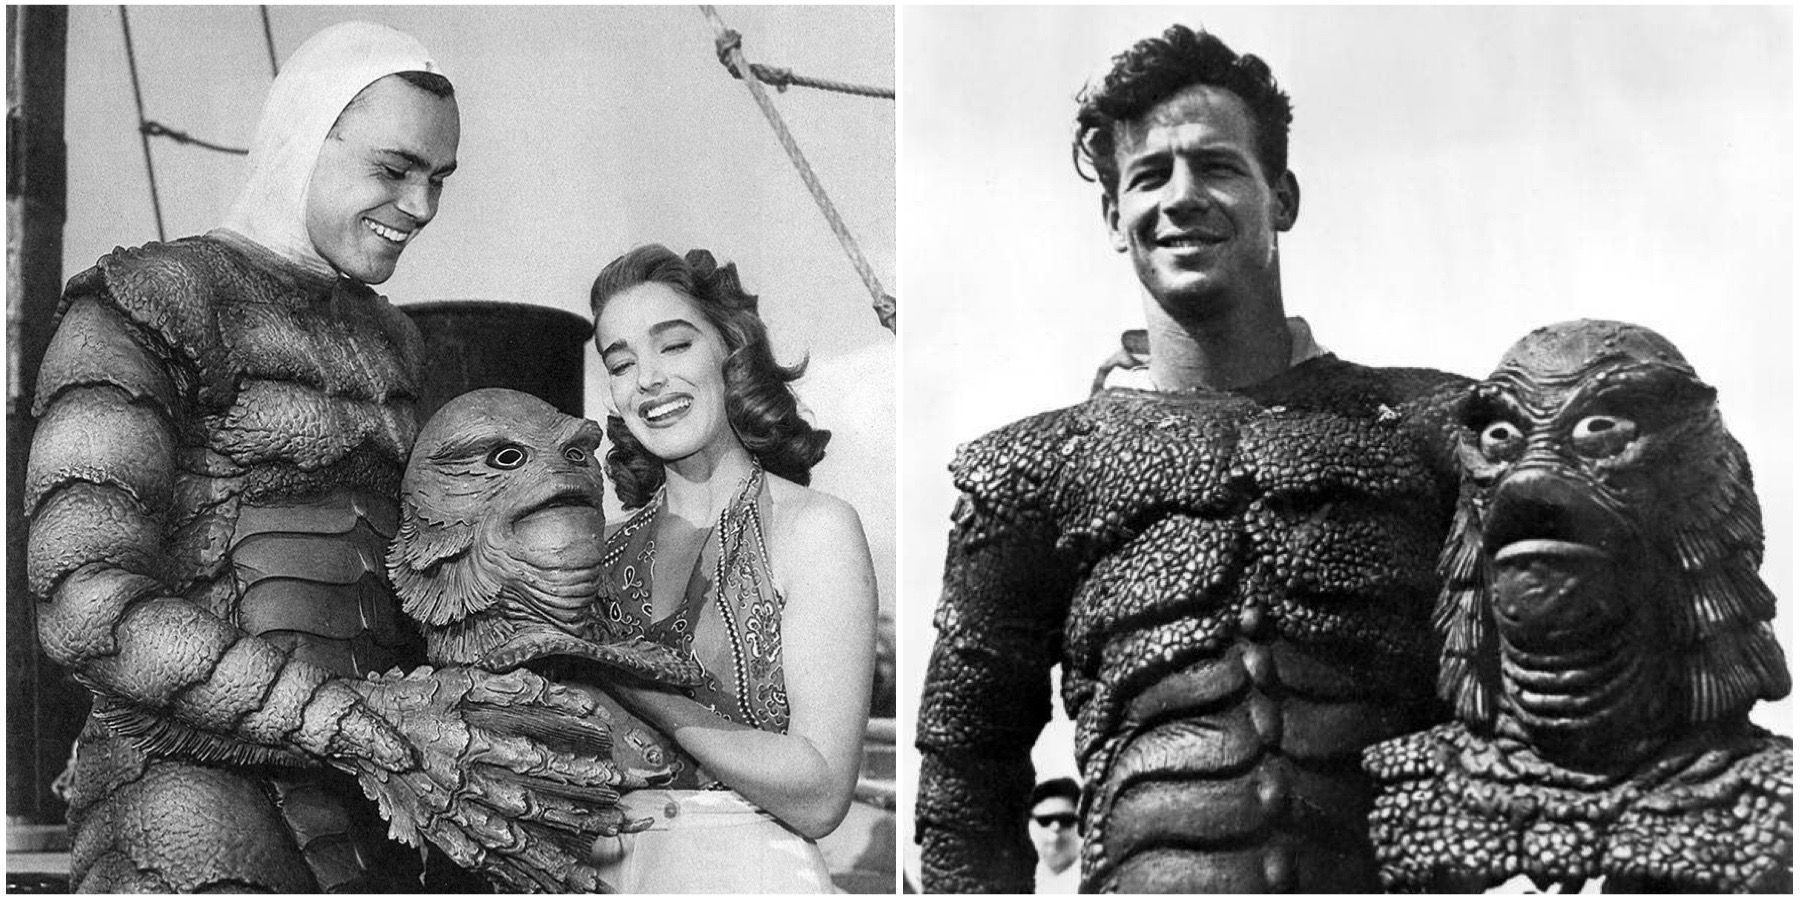 Ricou Browning and Ben Chapman as Gill-Man in Creature from the Black Lagoon